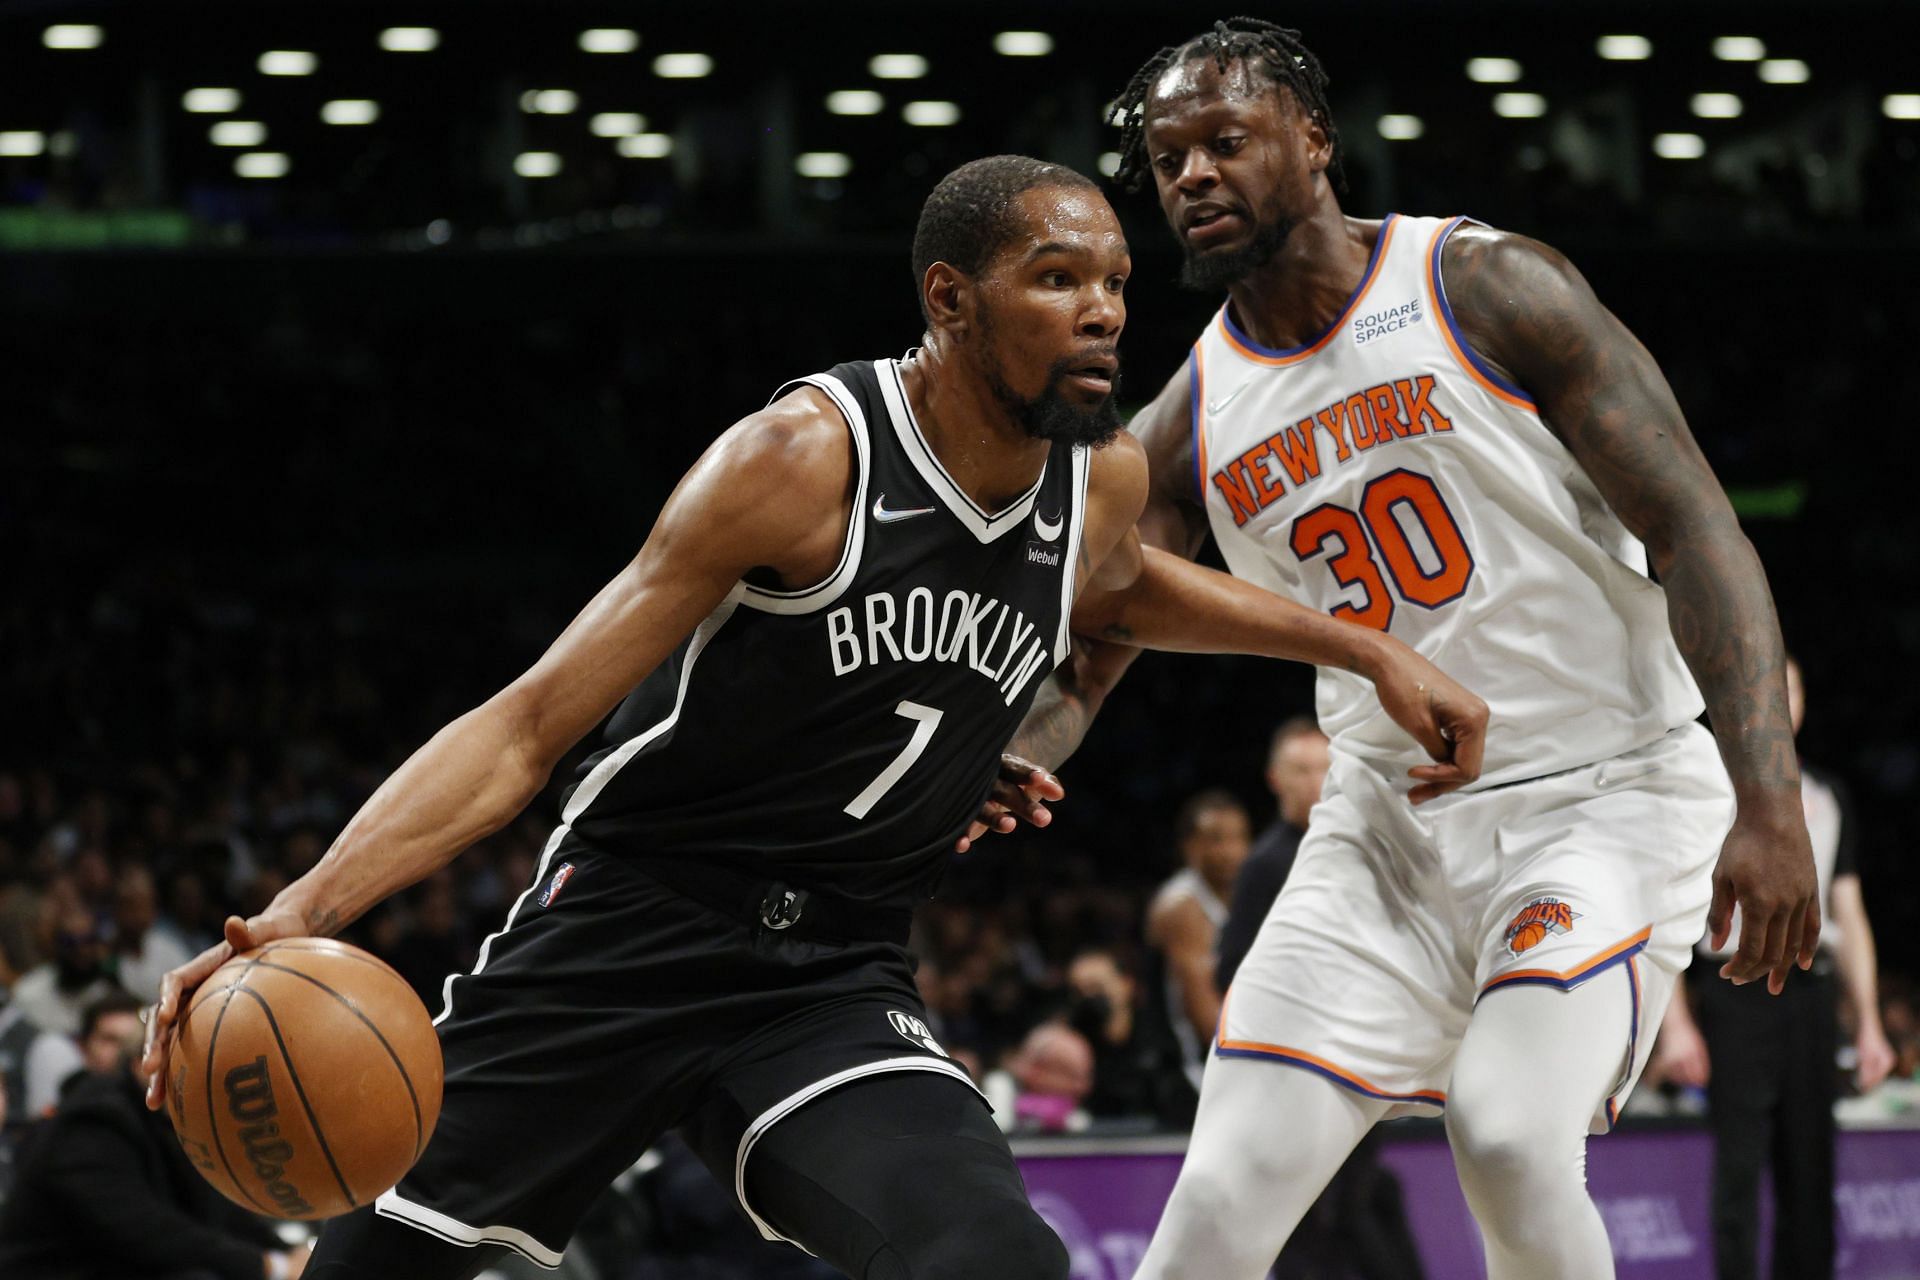 Kevin Durant of the Brooklyn Nets dribbles against Julius Randle of the New York Knicks.